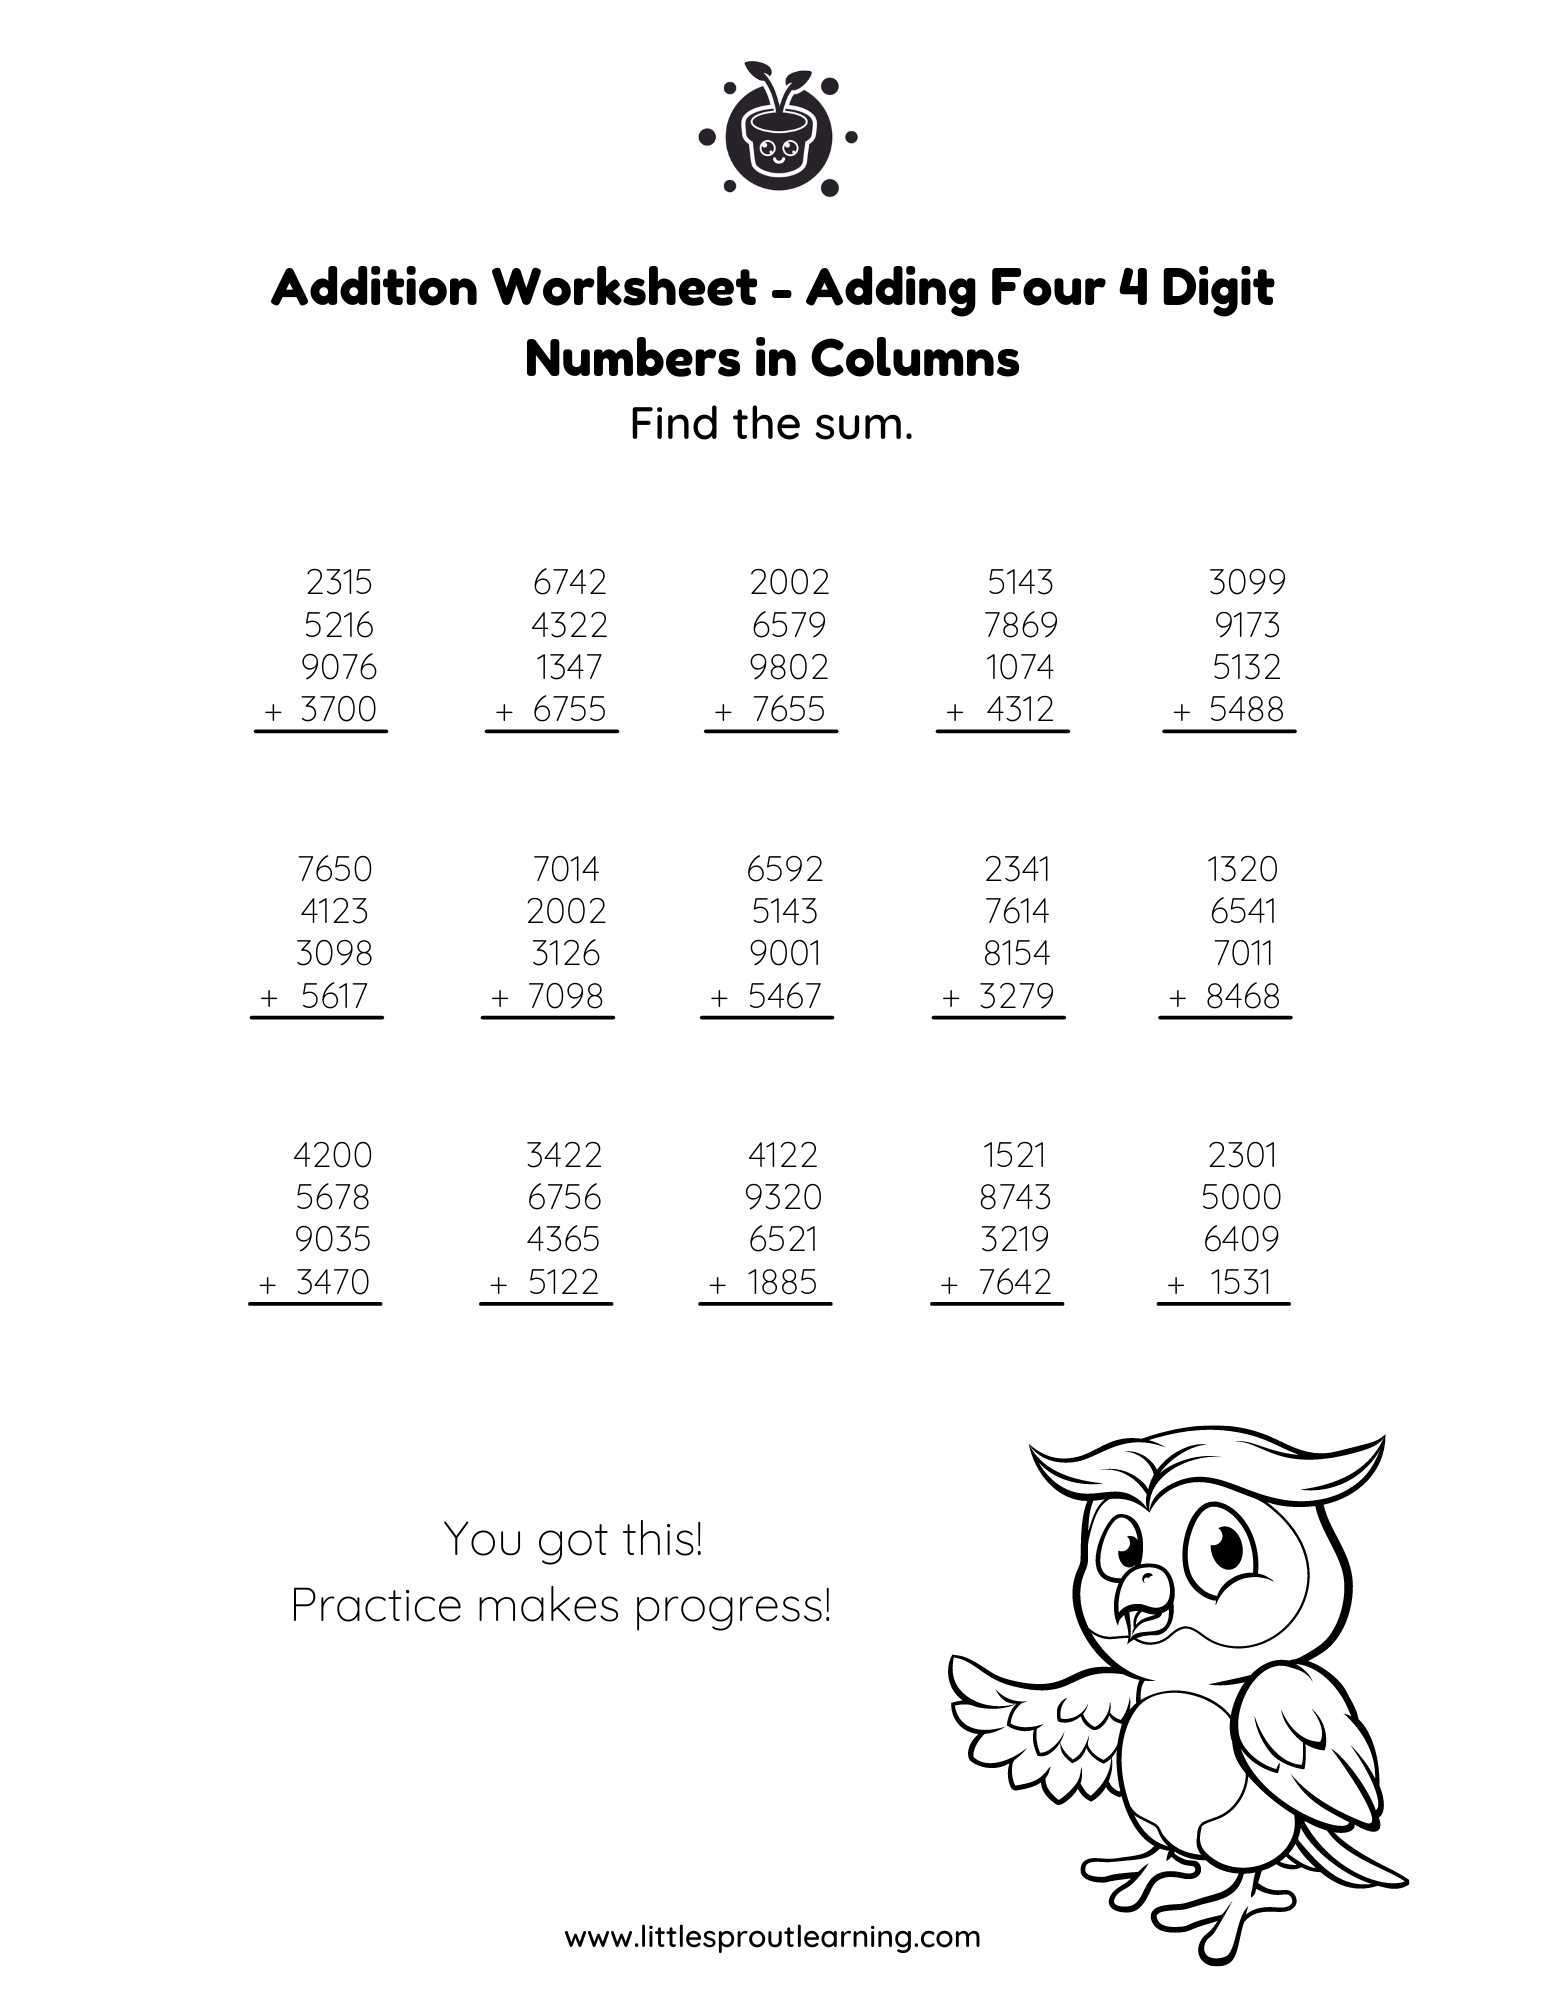 Adding in Columns – Adding Four 4 Digit Numbers